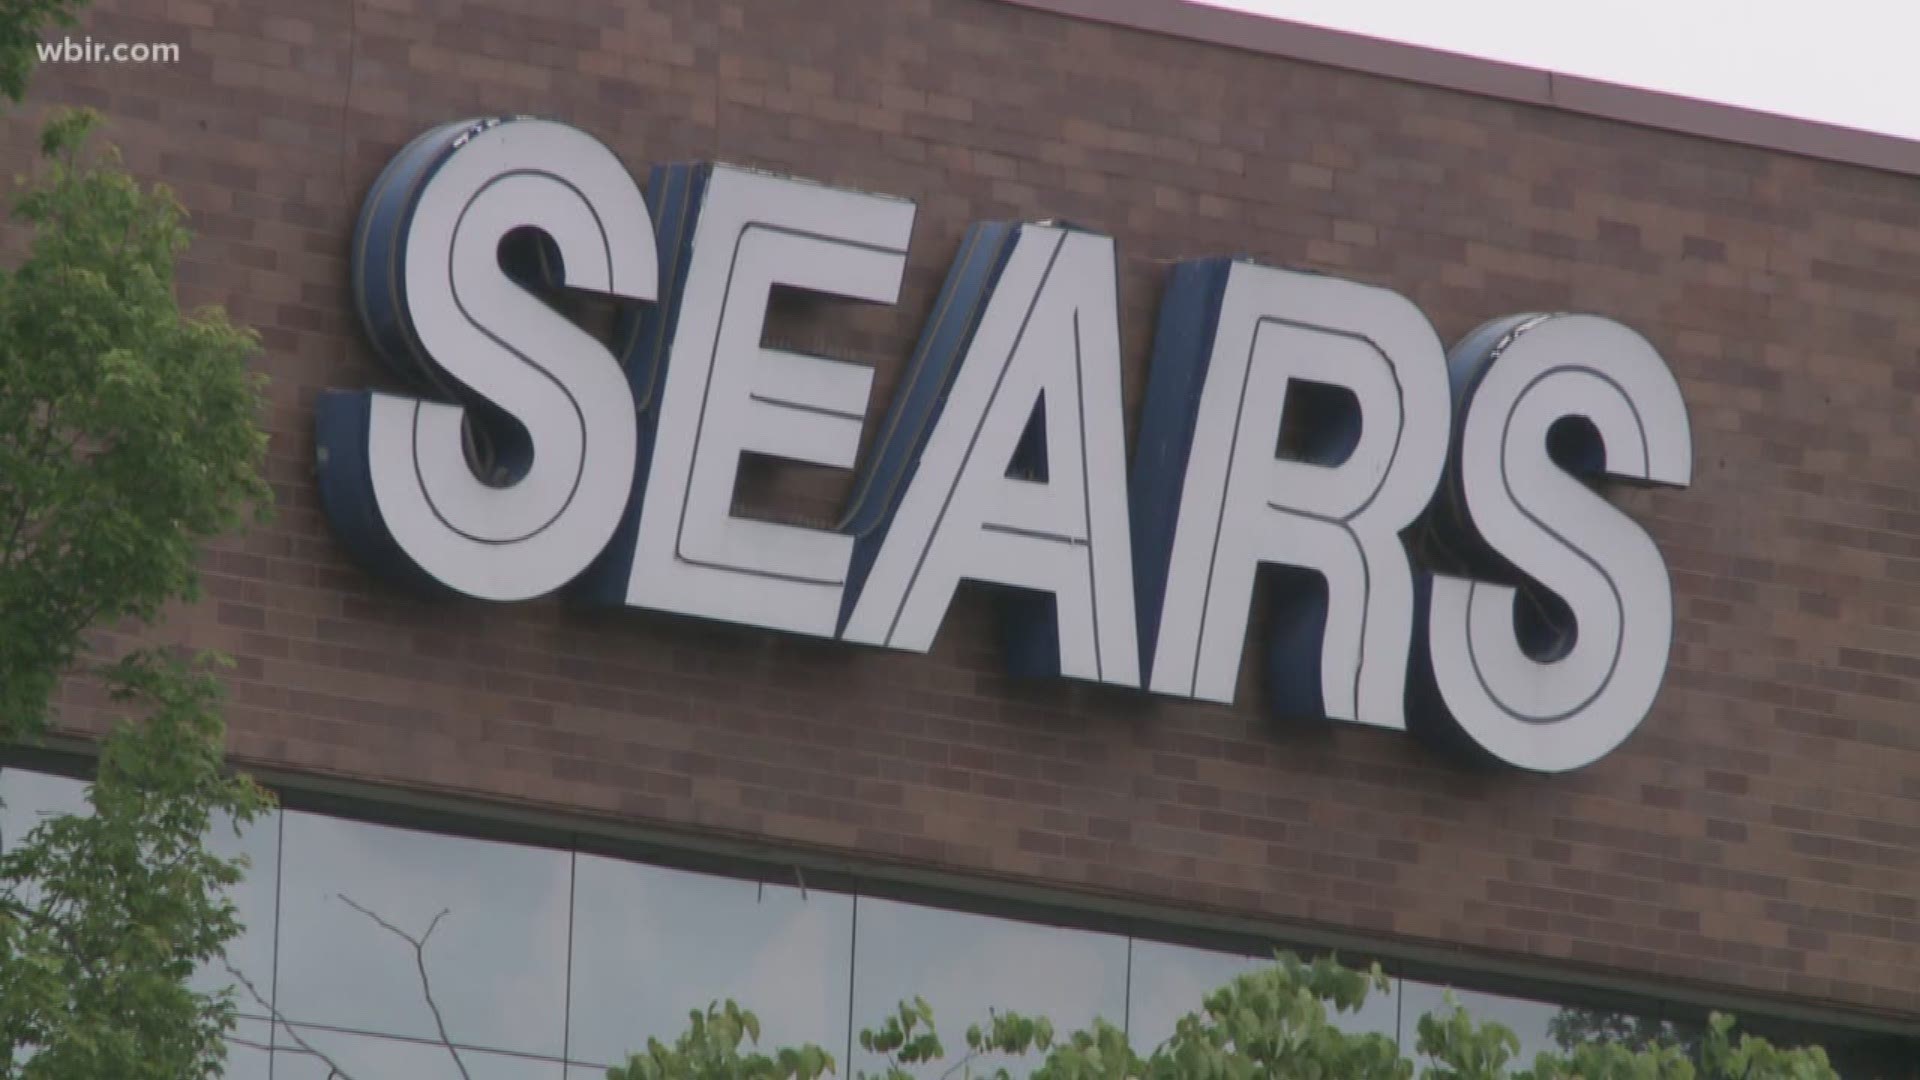 Sears Holdings said Thursday it will be closing more than 70 additional stores in 2018 as its sales continue to erode, dropping more than 30 percent in the latest quarter from a year ago.